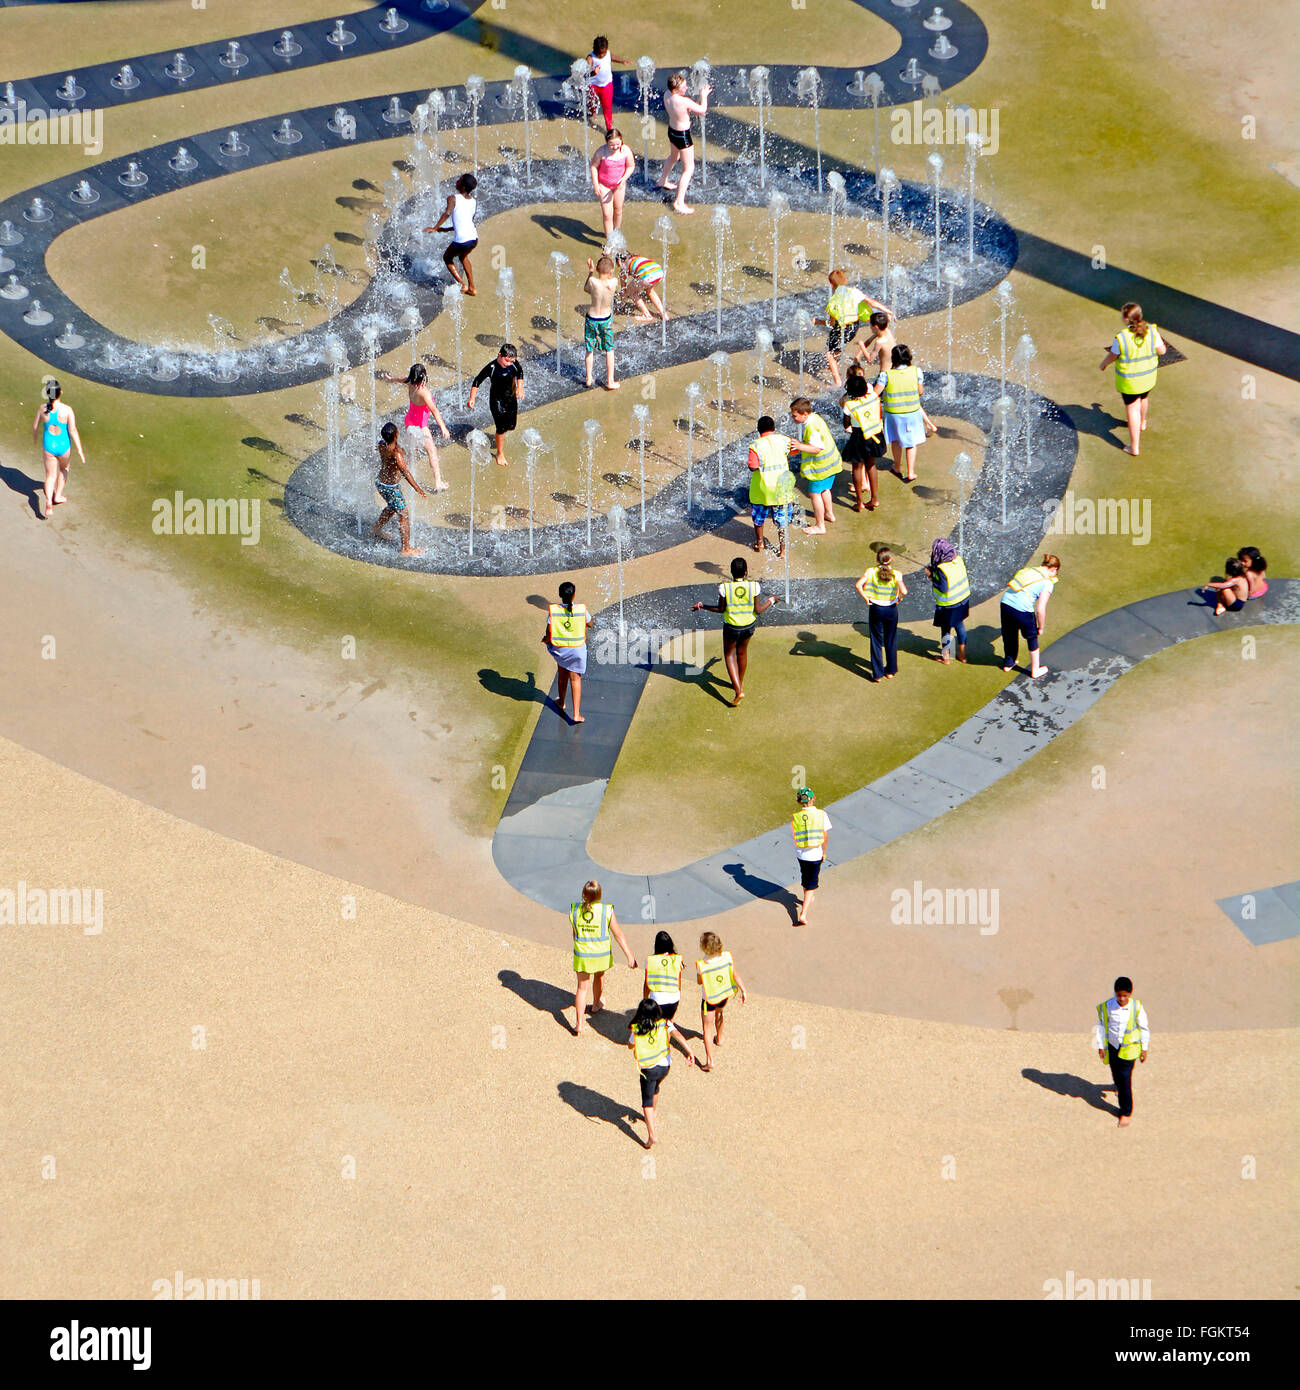 Aerial view kids play outdoors in water fountain jets school trip hot summer day Queen Elizabeth Olympic Park London Newham Stratford East London UK Stock Photo